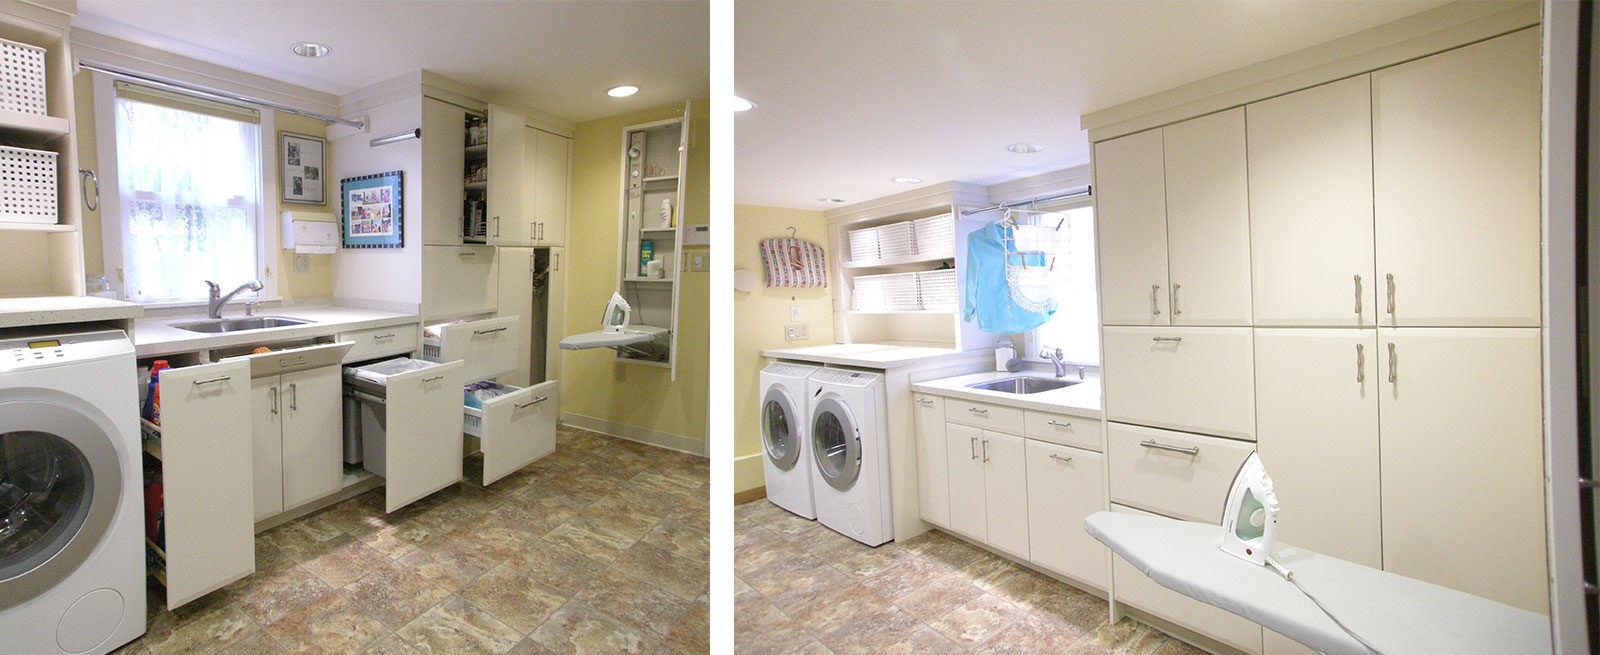 Custom, Clean, and Clever Laundry Room Ideas - Home Remodeling - Corian Countertops - Custom Kitchens